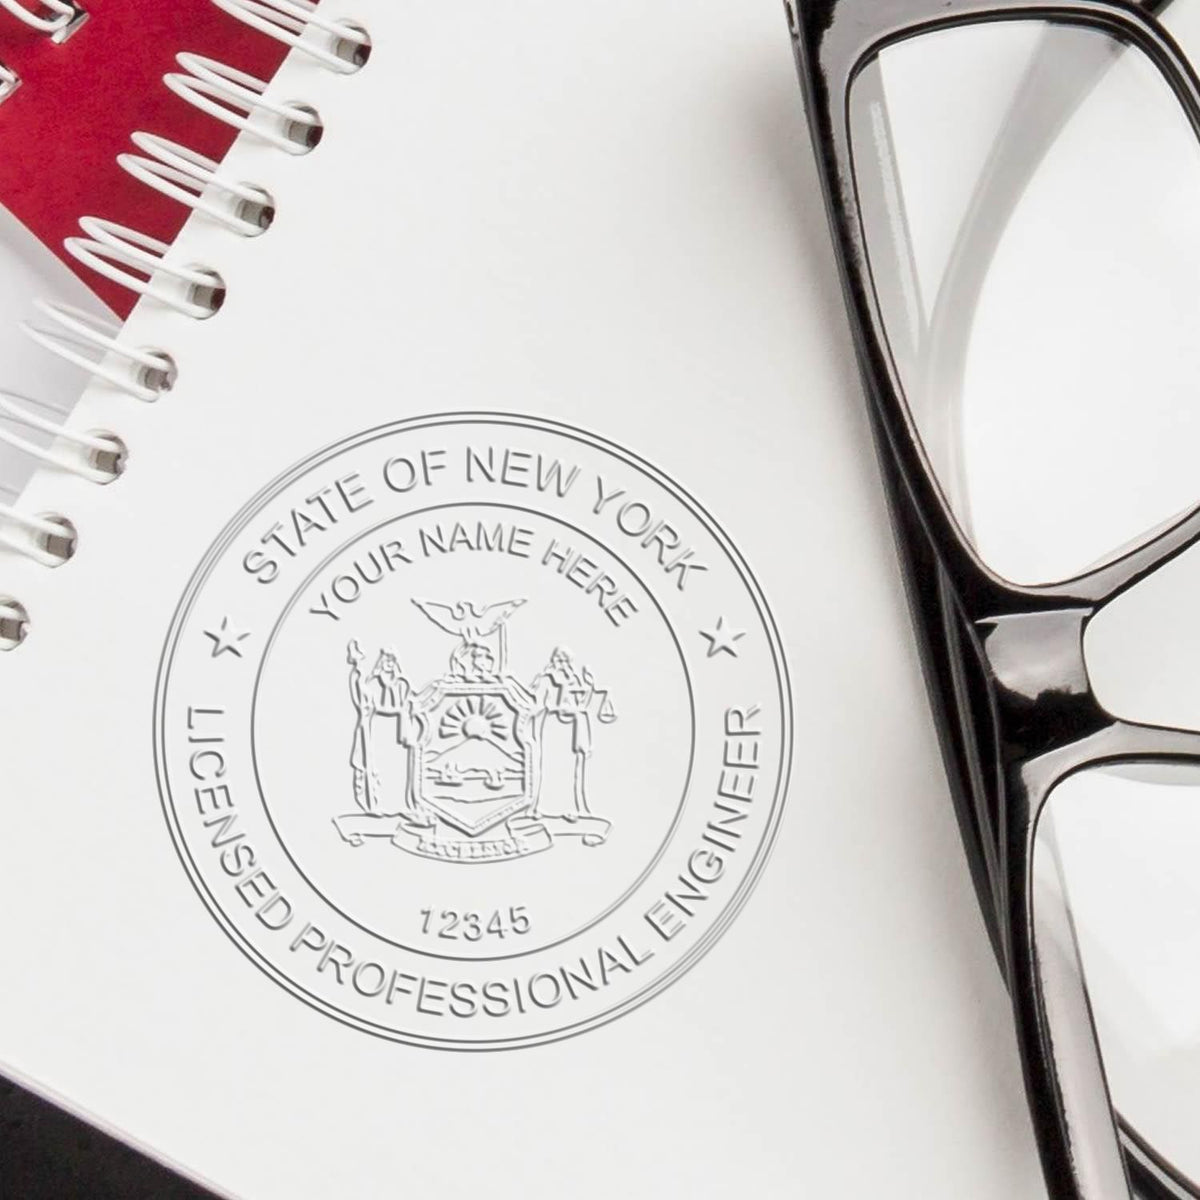 An in use photo of the Hybrid New York Engineer Seal showing a sample imprint on a cardstock